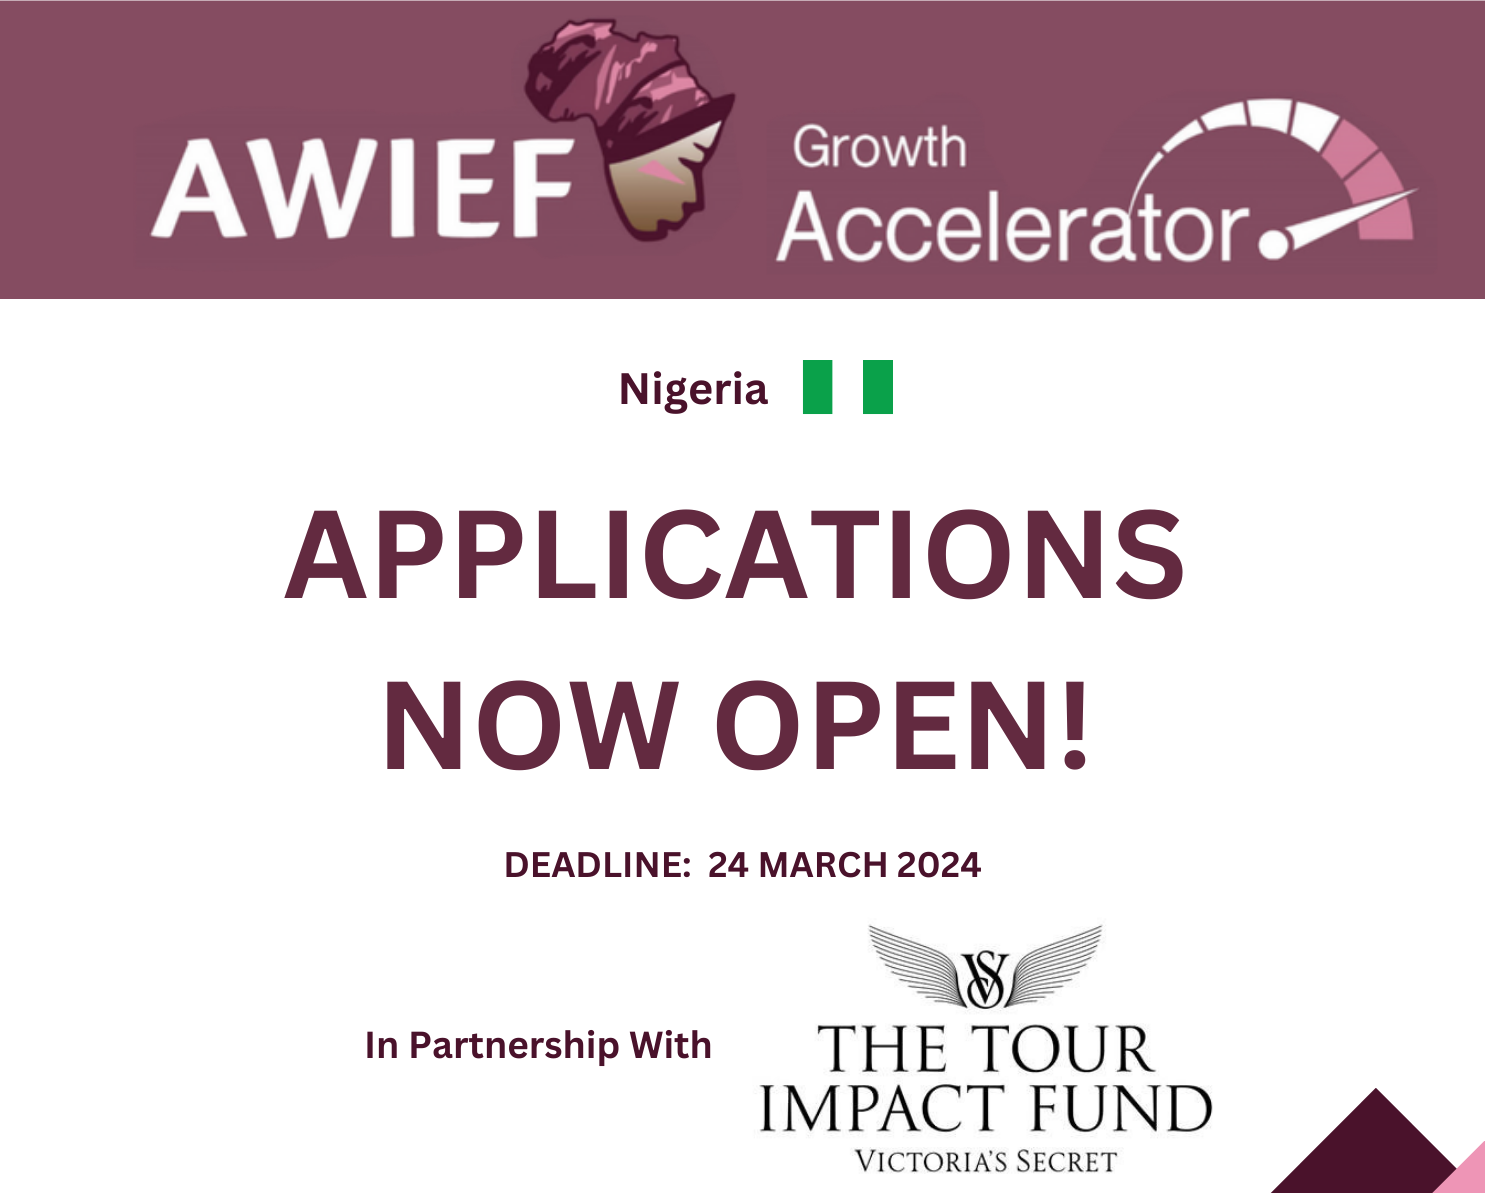 AWIEF Partners With Victoria’s Secret to Launch Its Growth Accelerator in Nigeria